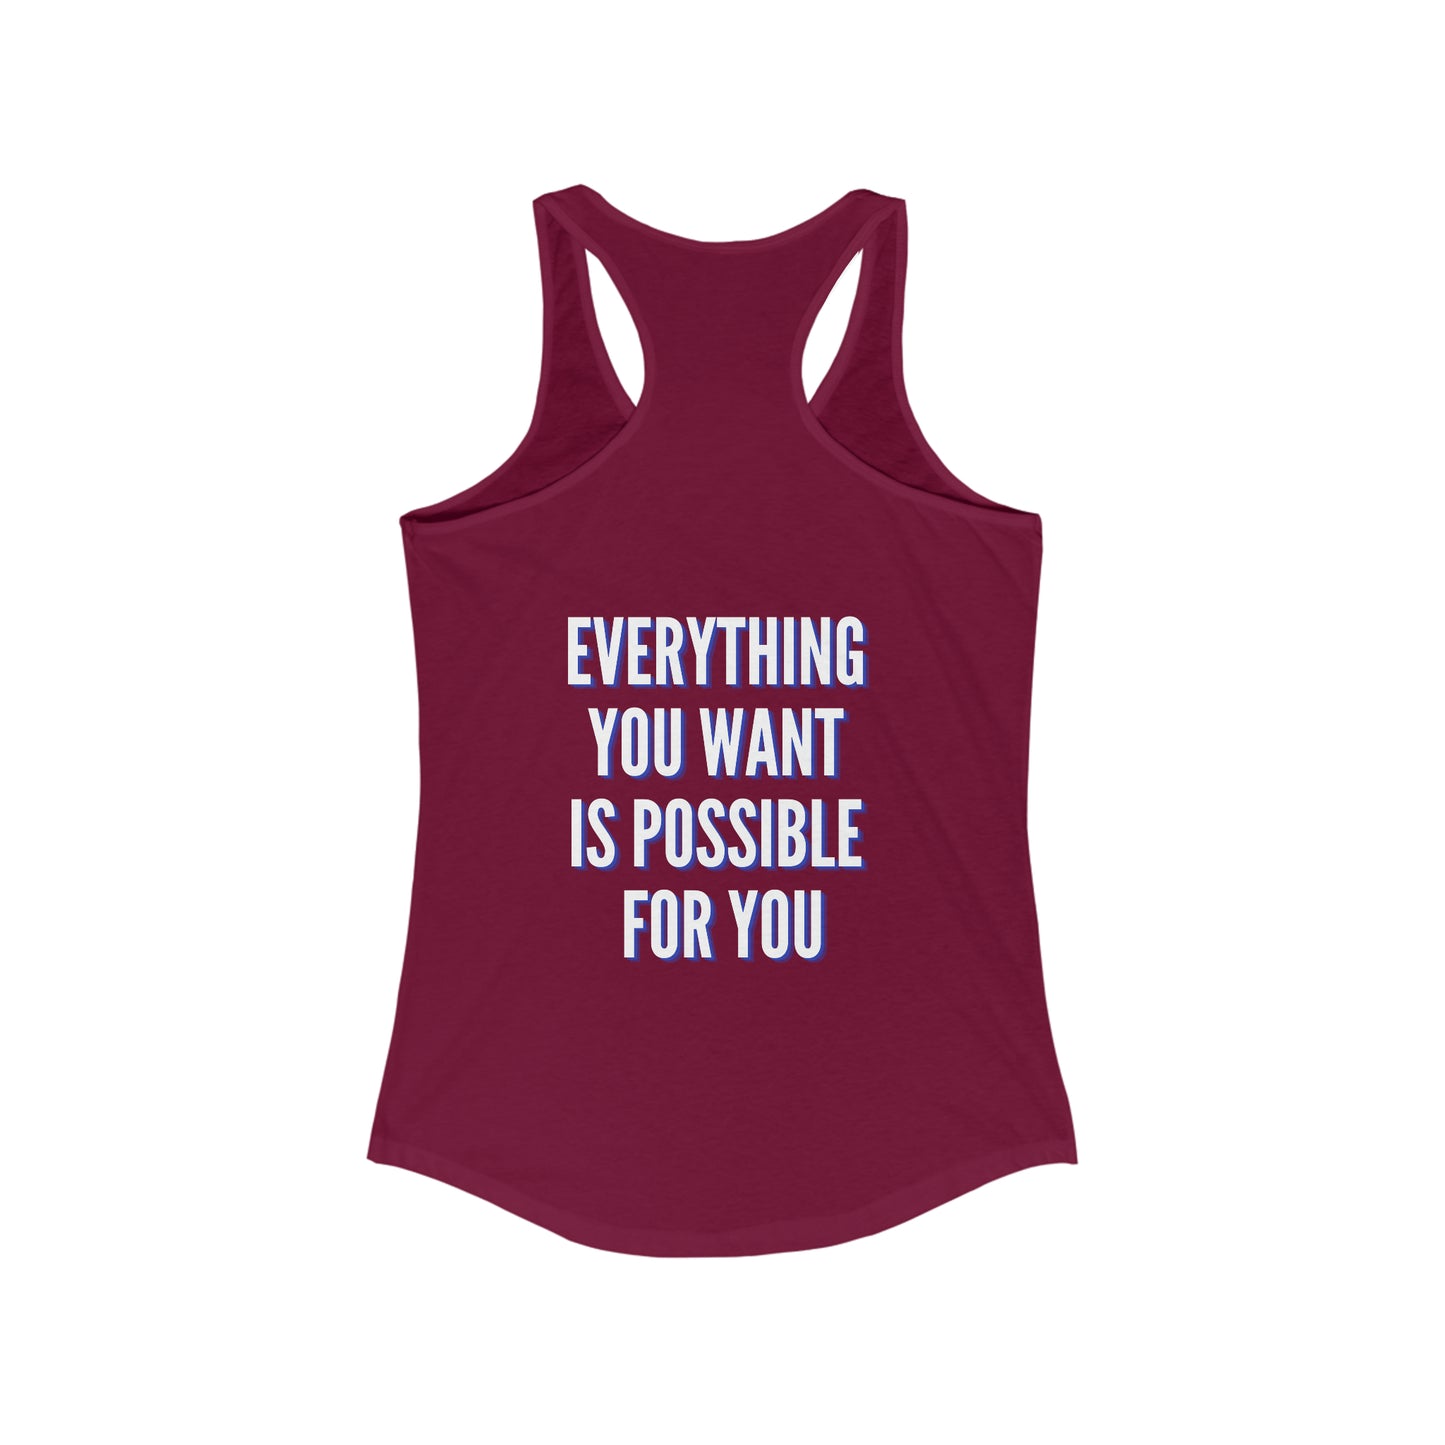 Women's RGA Tank - Everything You Want Is Possible For You